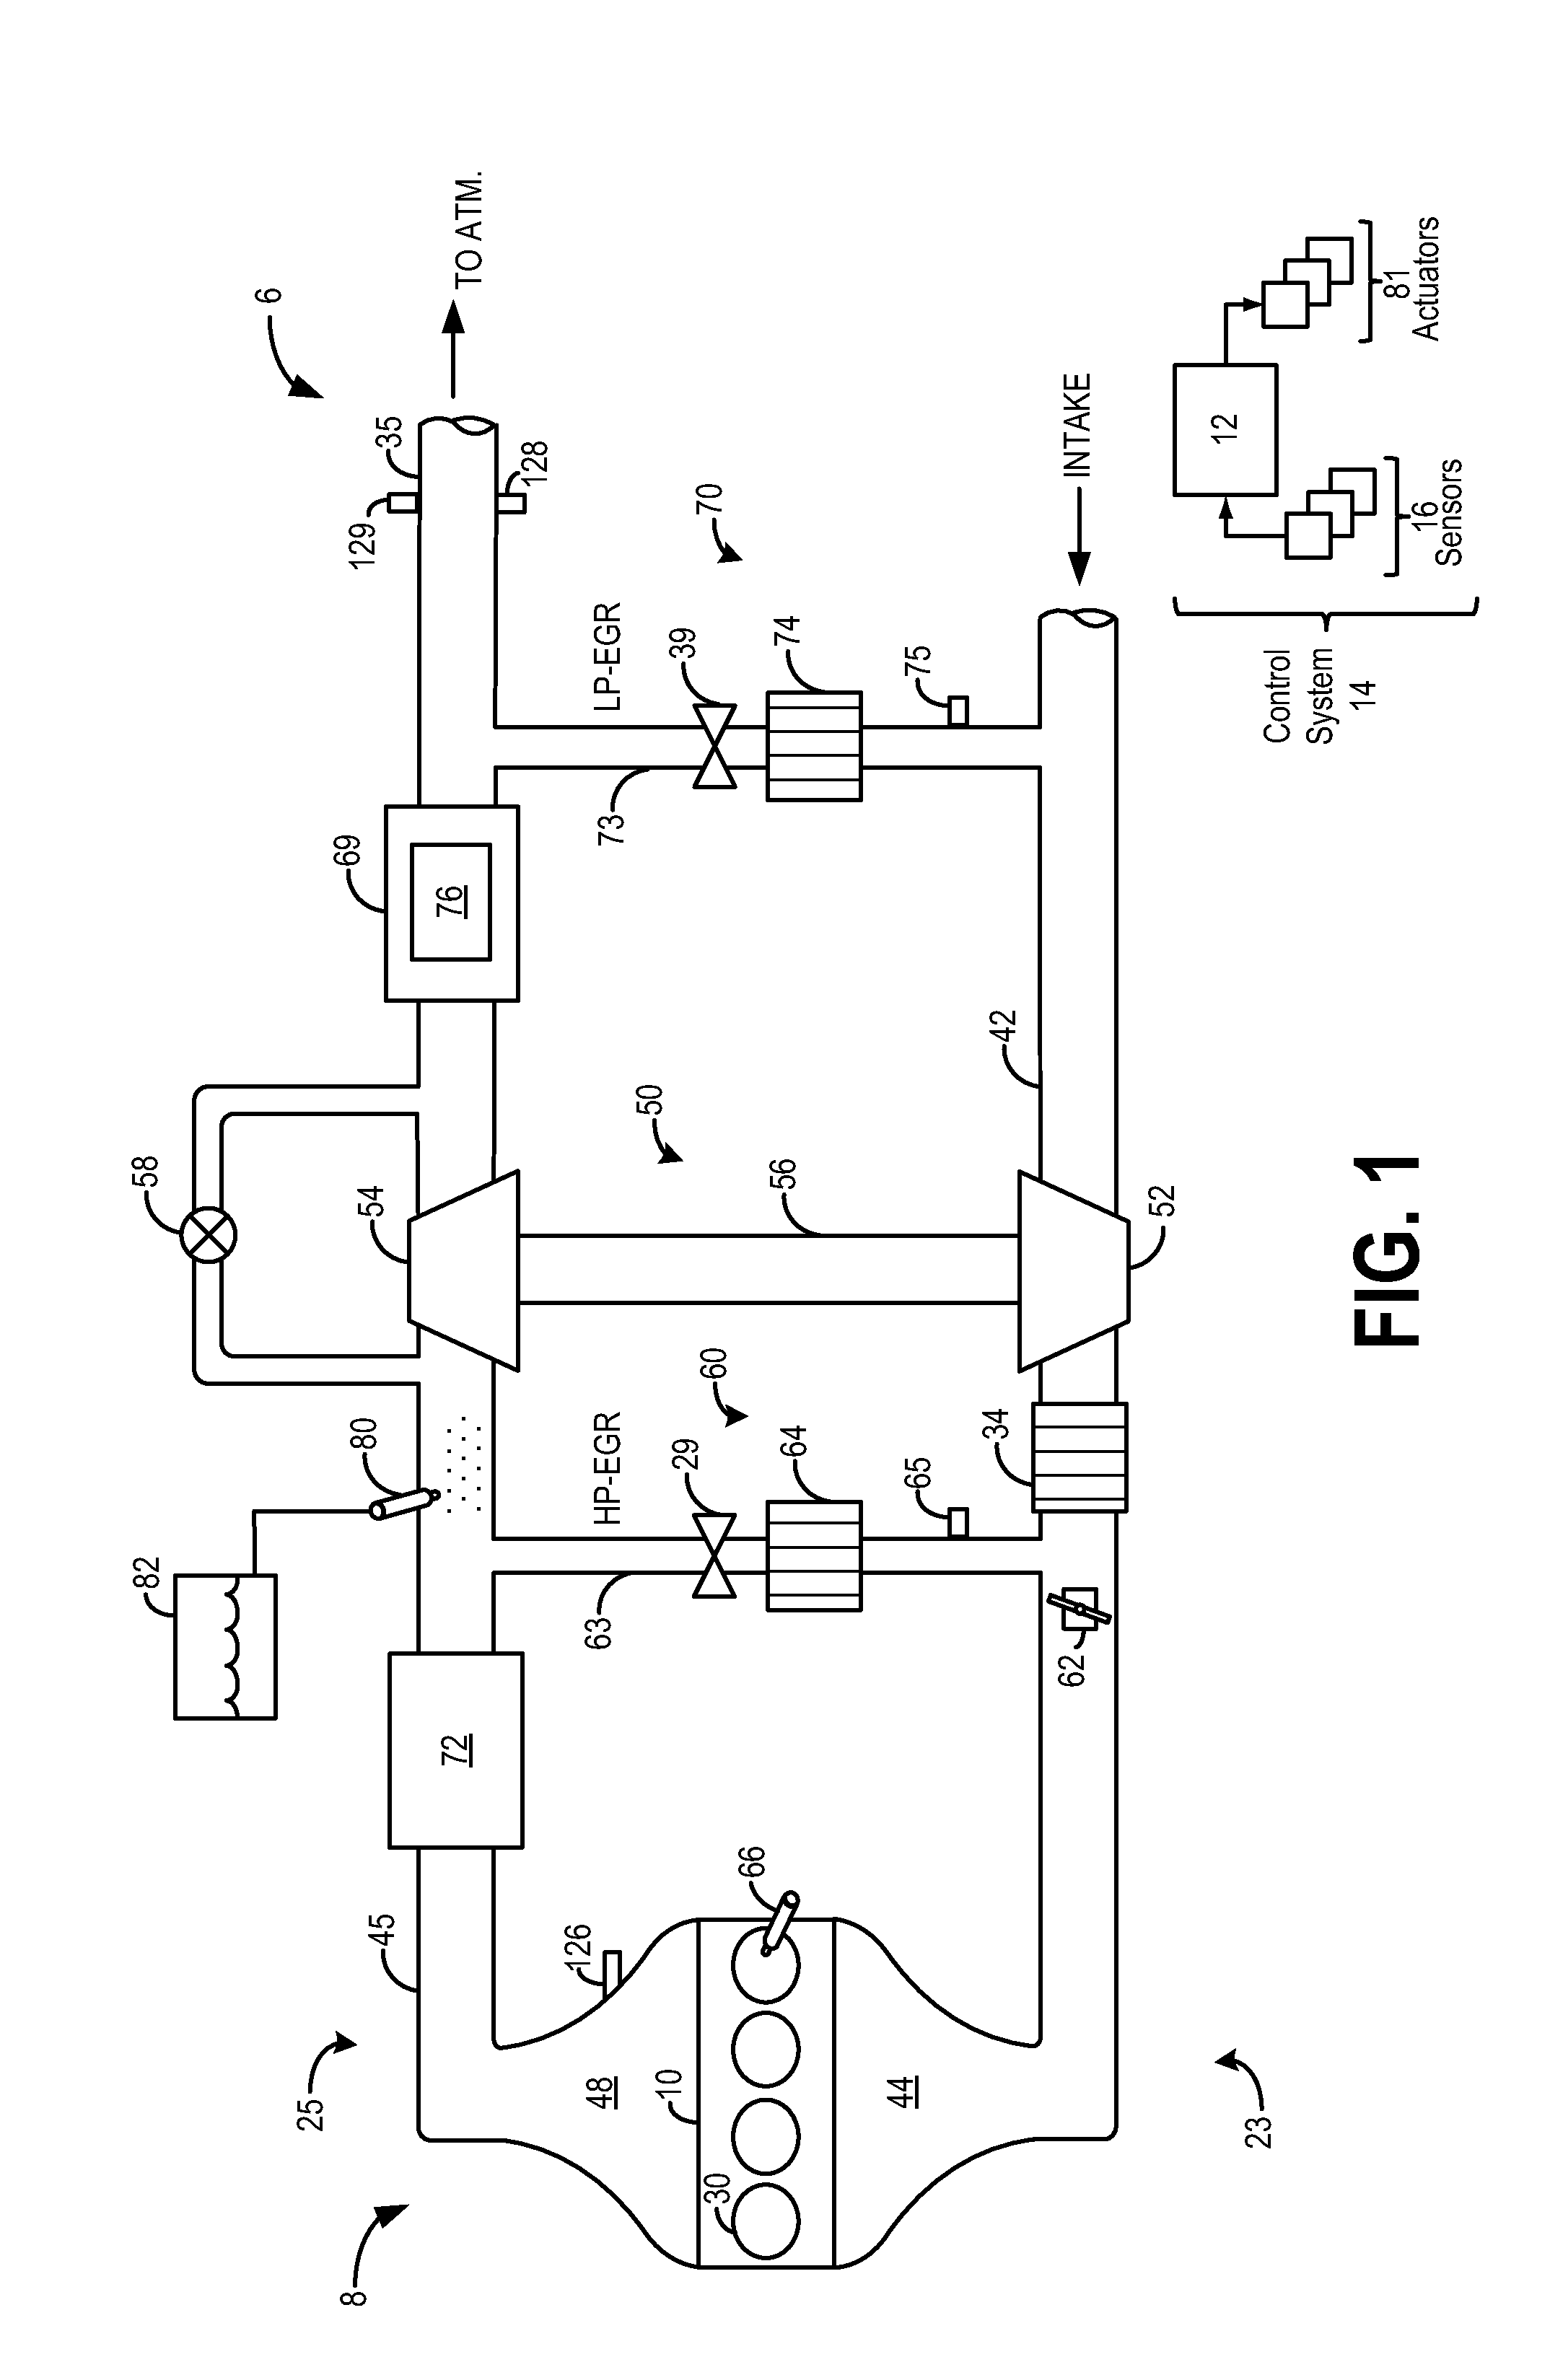 Methods and Systems for Emission System Control